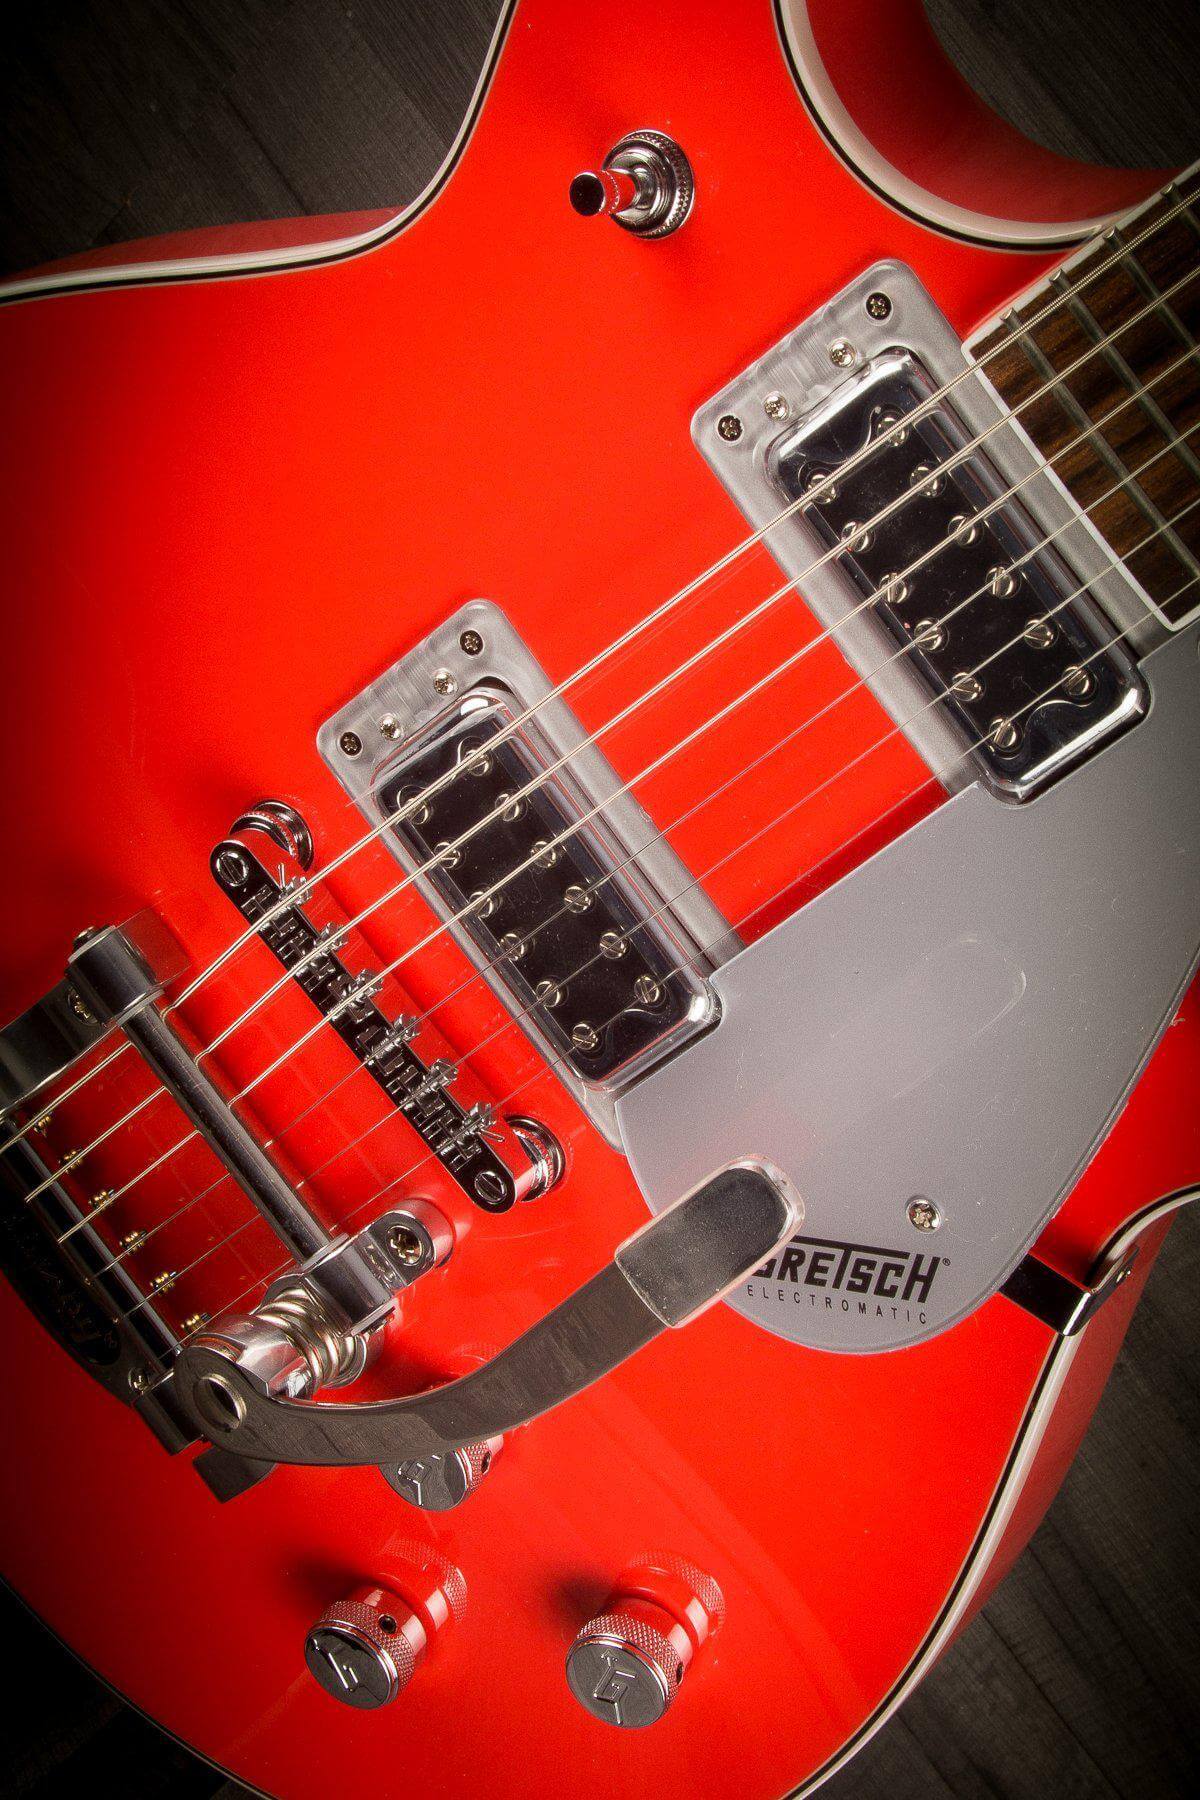 Gretsch Electric Guitar Gretsch G5232T Electromatic Double Jet FT with Bigsby - Tahiti Red